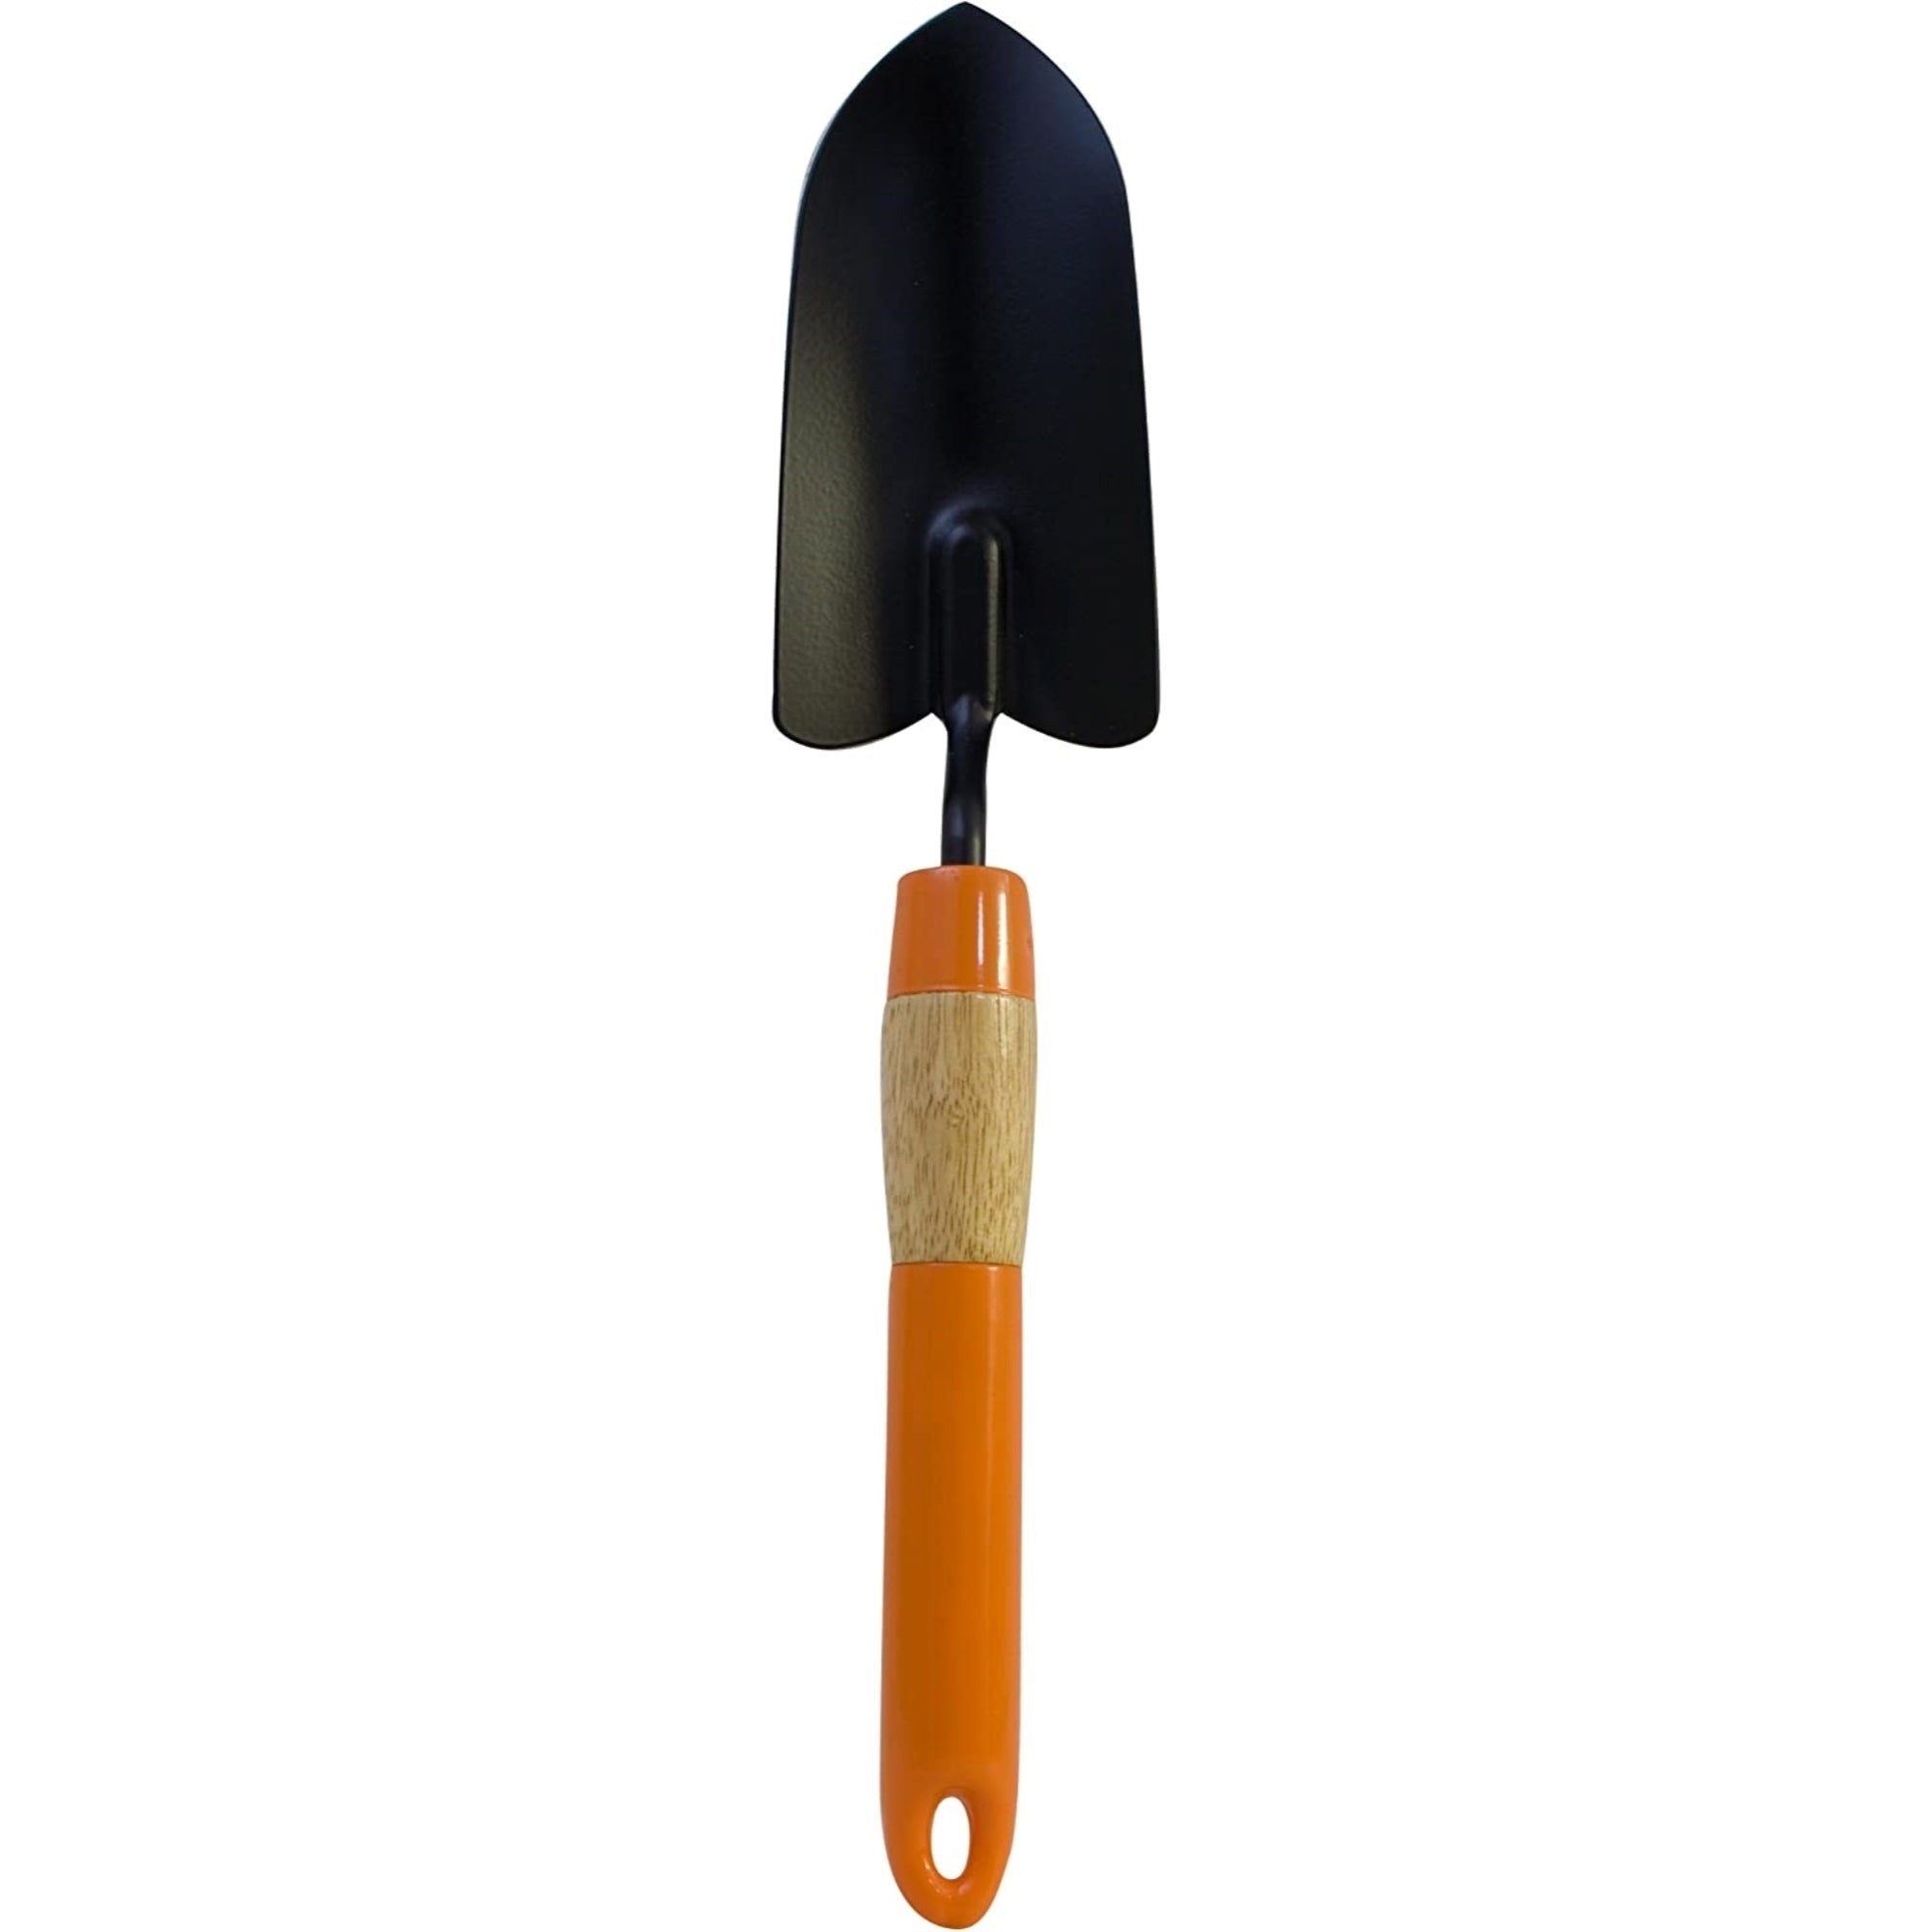 FlexrakeTrowel with Black Powder-Coated Head & Contoured Handle for Gardening